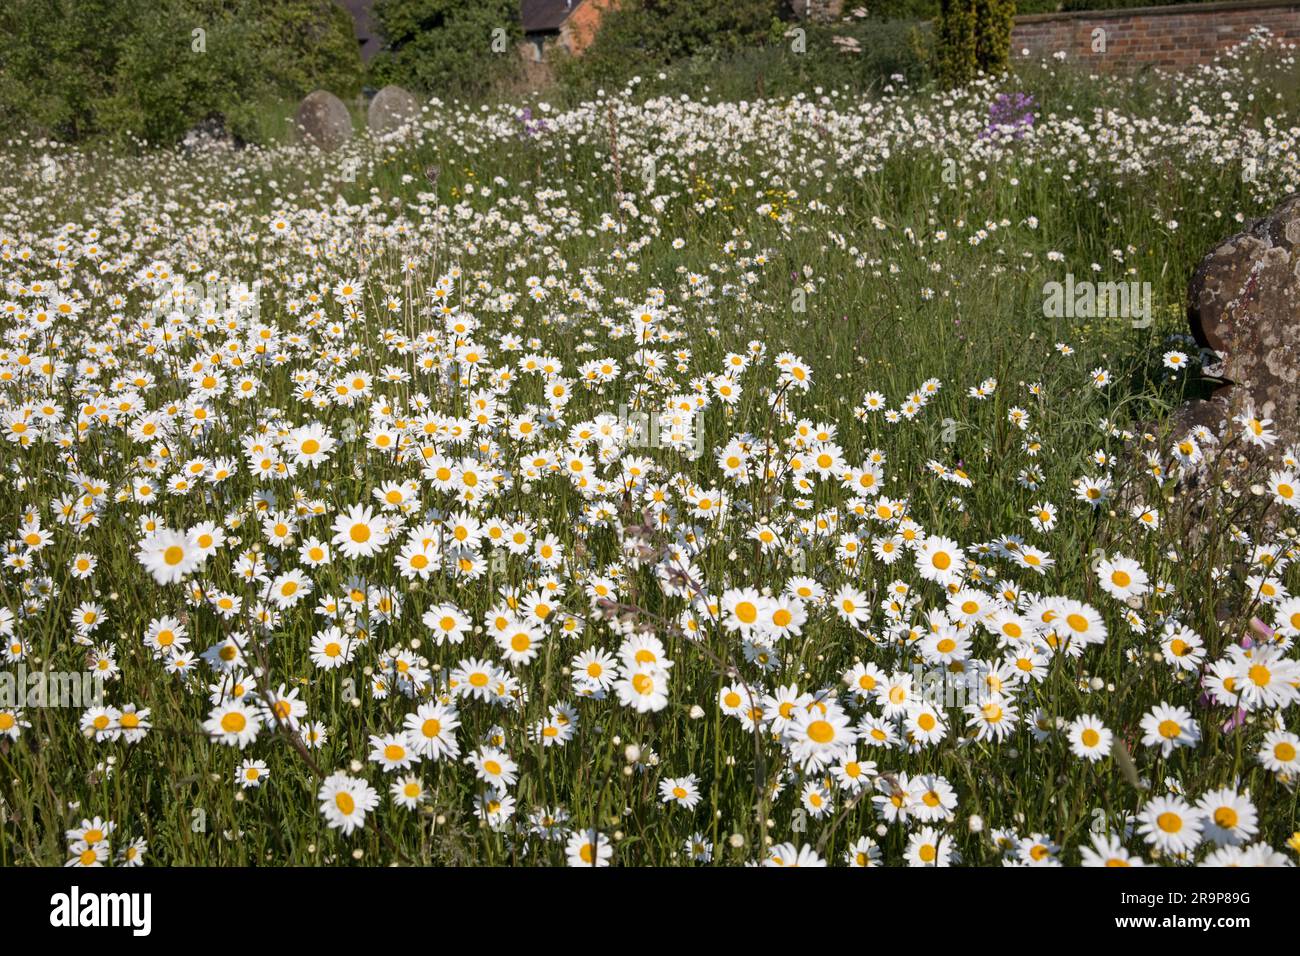 Wildflowers in full bloom in churchyard  St. Lawrence Church Oxhill Warks UK Stock Photo